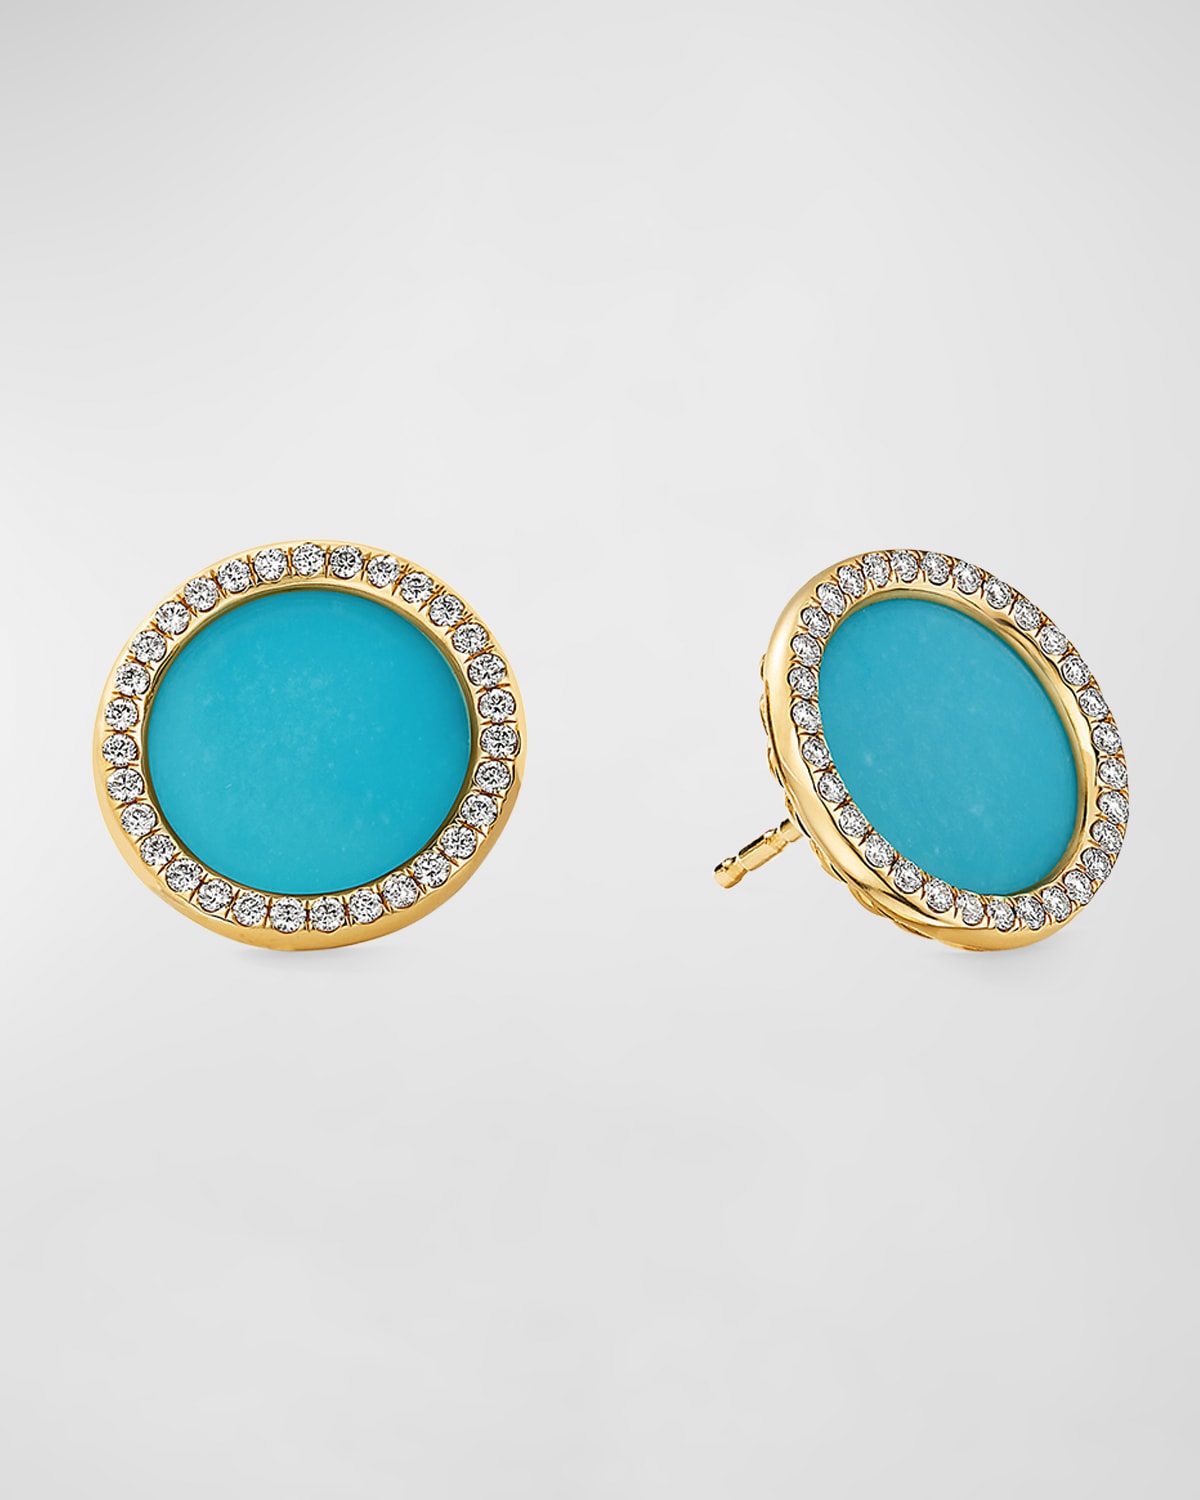 David Yurman Dy Elements Button Earrings In 18k Yellow Gold With Mother-of-pearl & Pave Diamonds In Turquoise